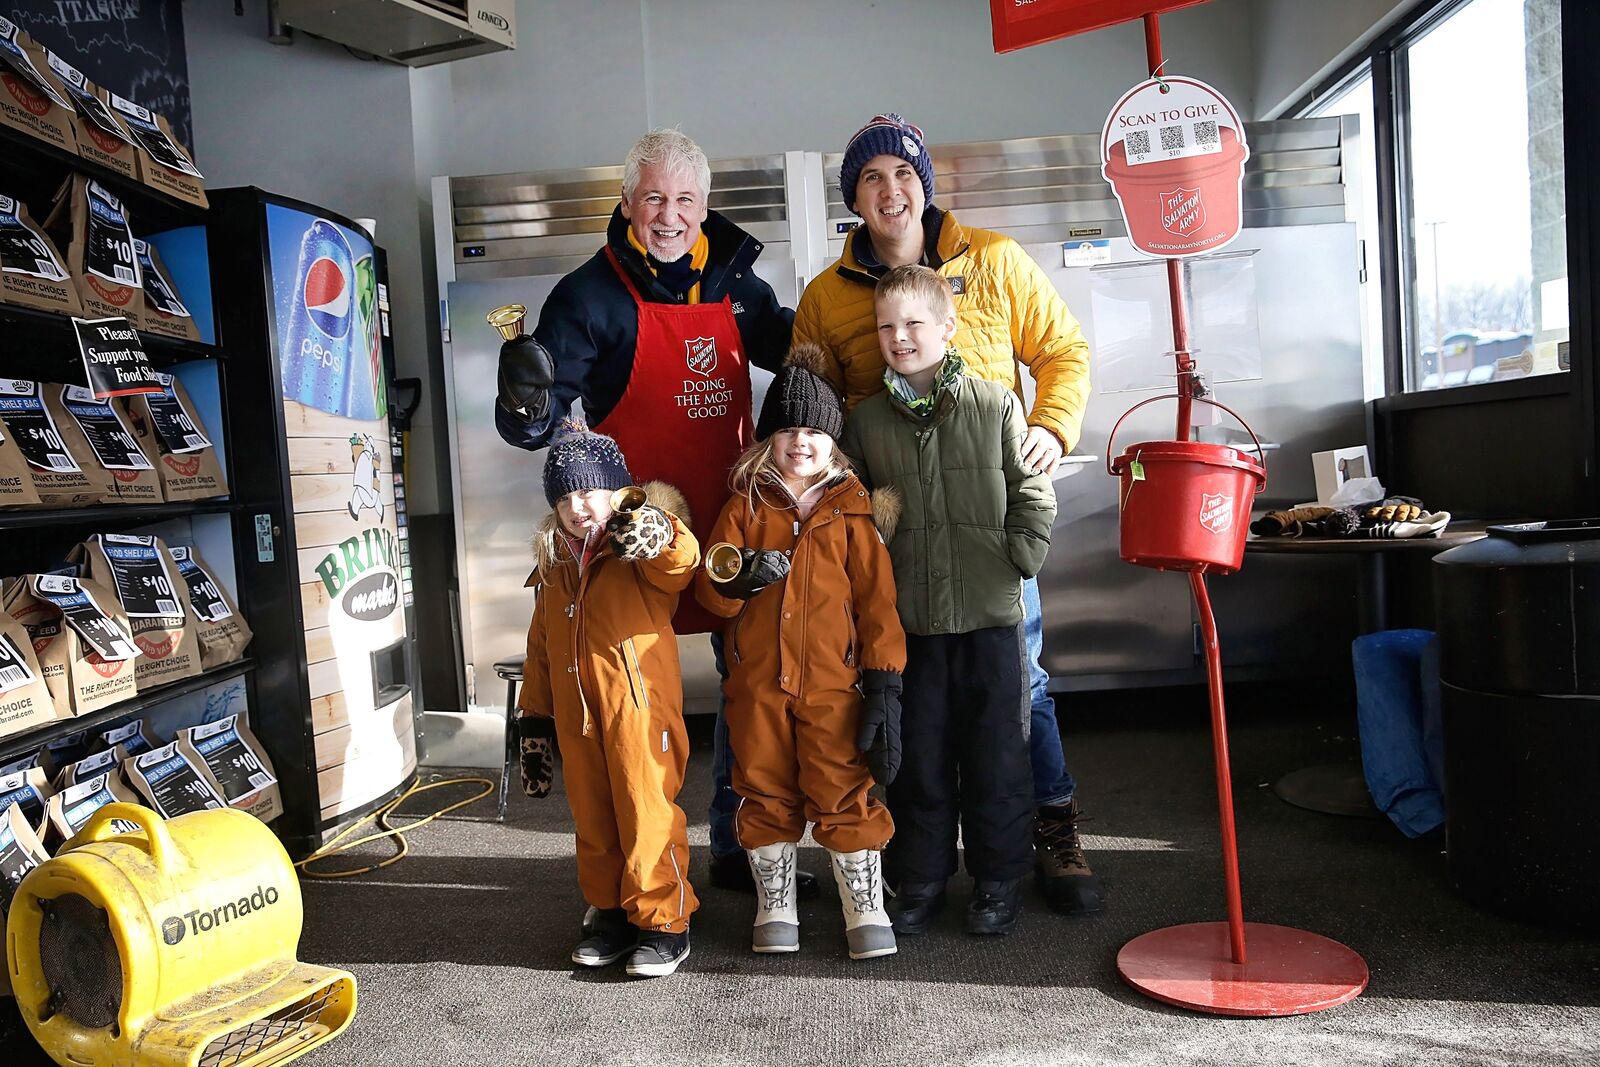 Salvation Army volunteers ringing bells at a Red Kettle